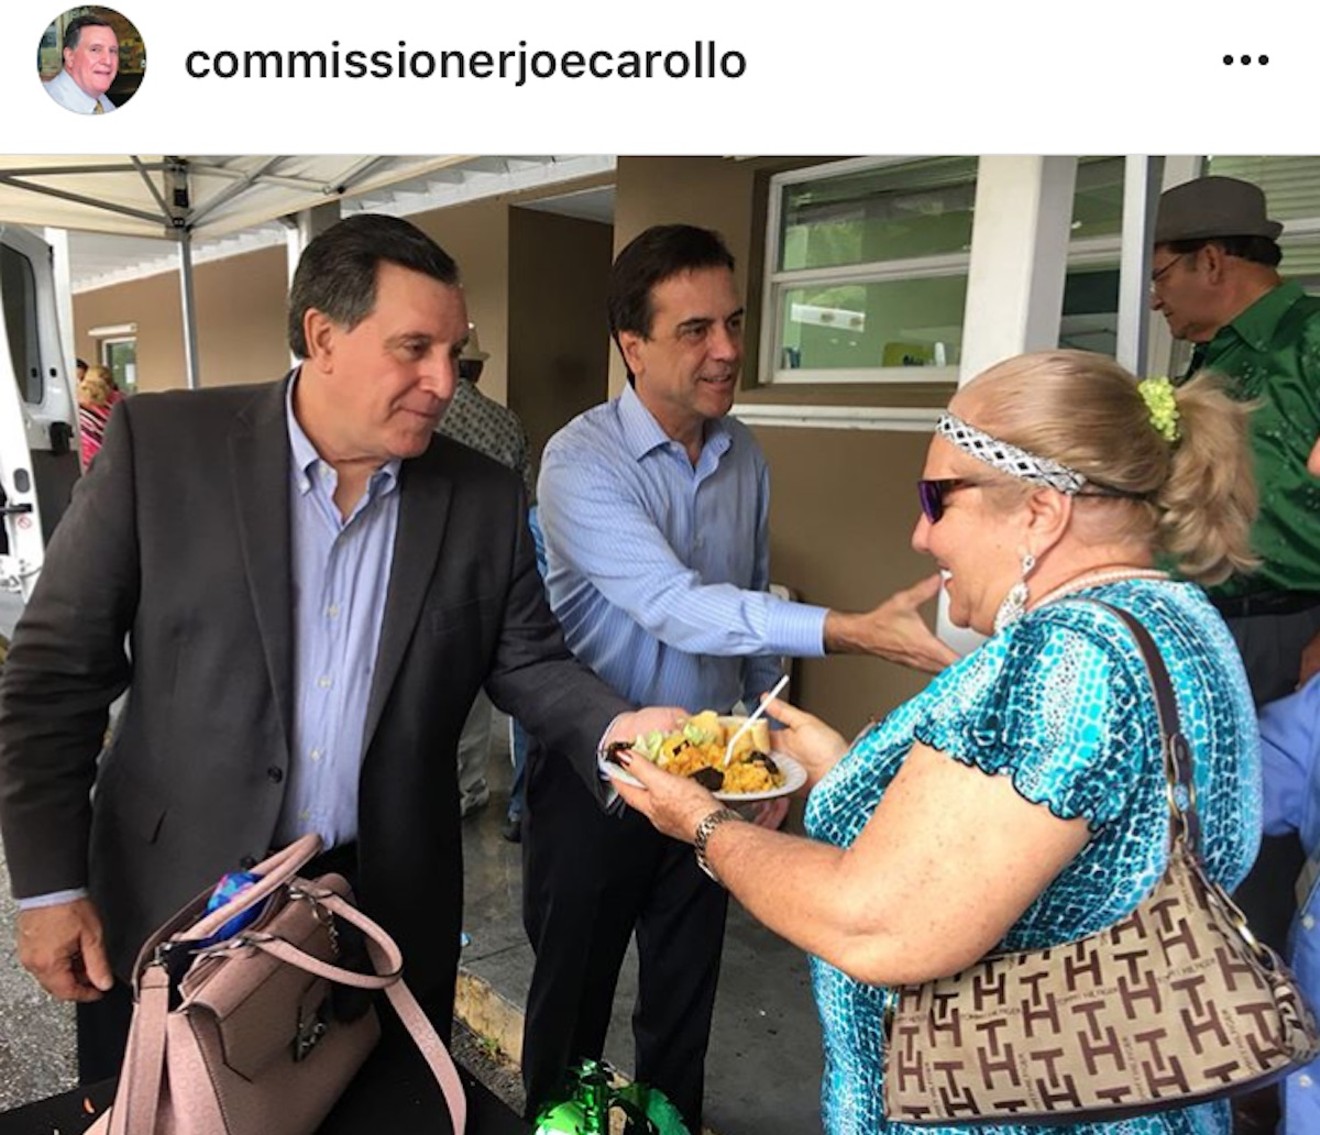 On May 19, 2018, Miami Commissioner Joe Carollo posted on Instagram this photo showing him handing out paella alongside county commission candidate Alex Diaz de la Portilla.